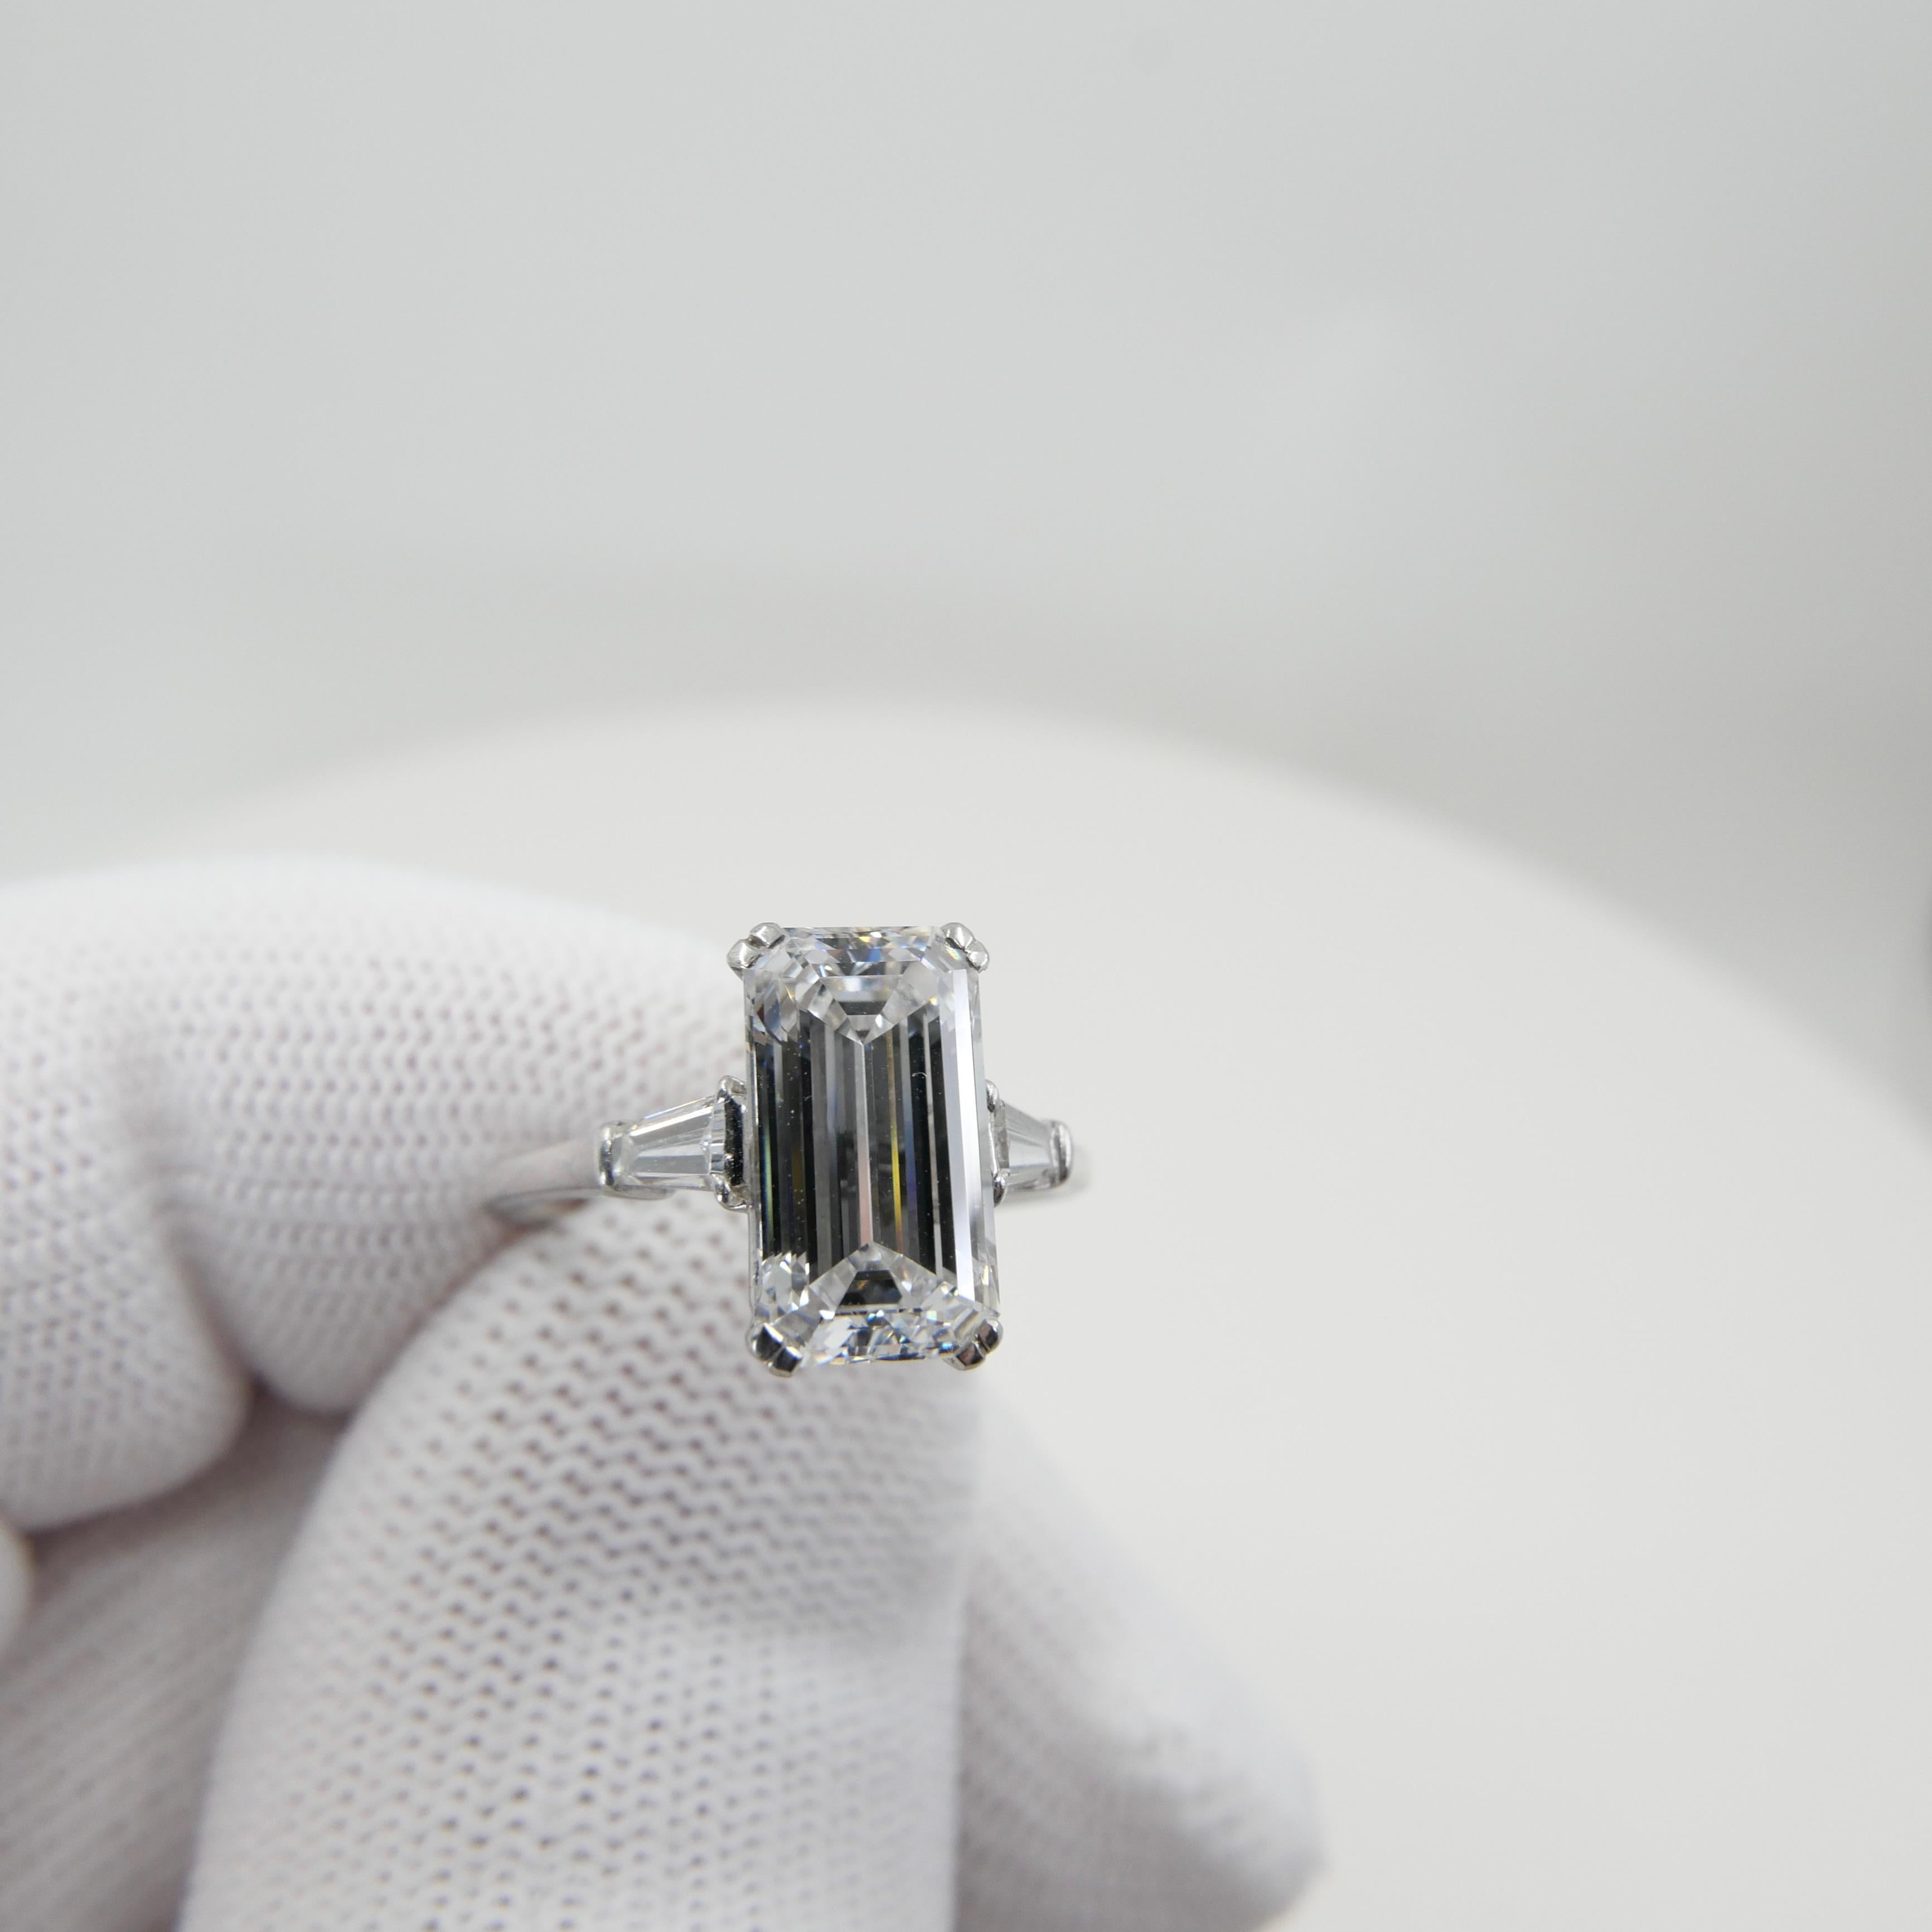 Emerald Cut GIA Certified 3 Cts D IF Winston Vintage Diamond Ring, Elongated with 1.78 Ratio